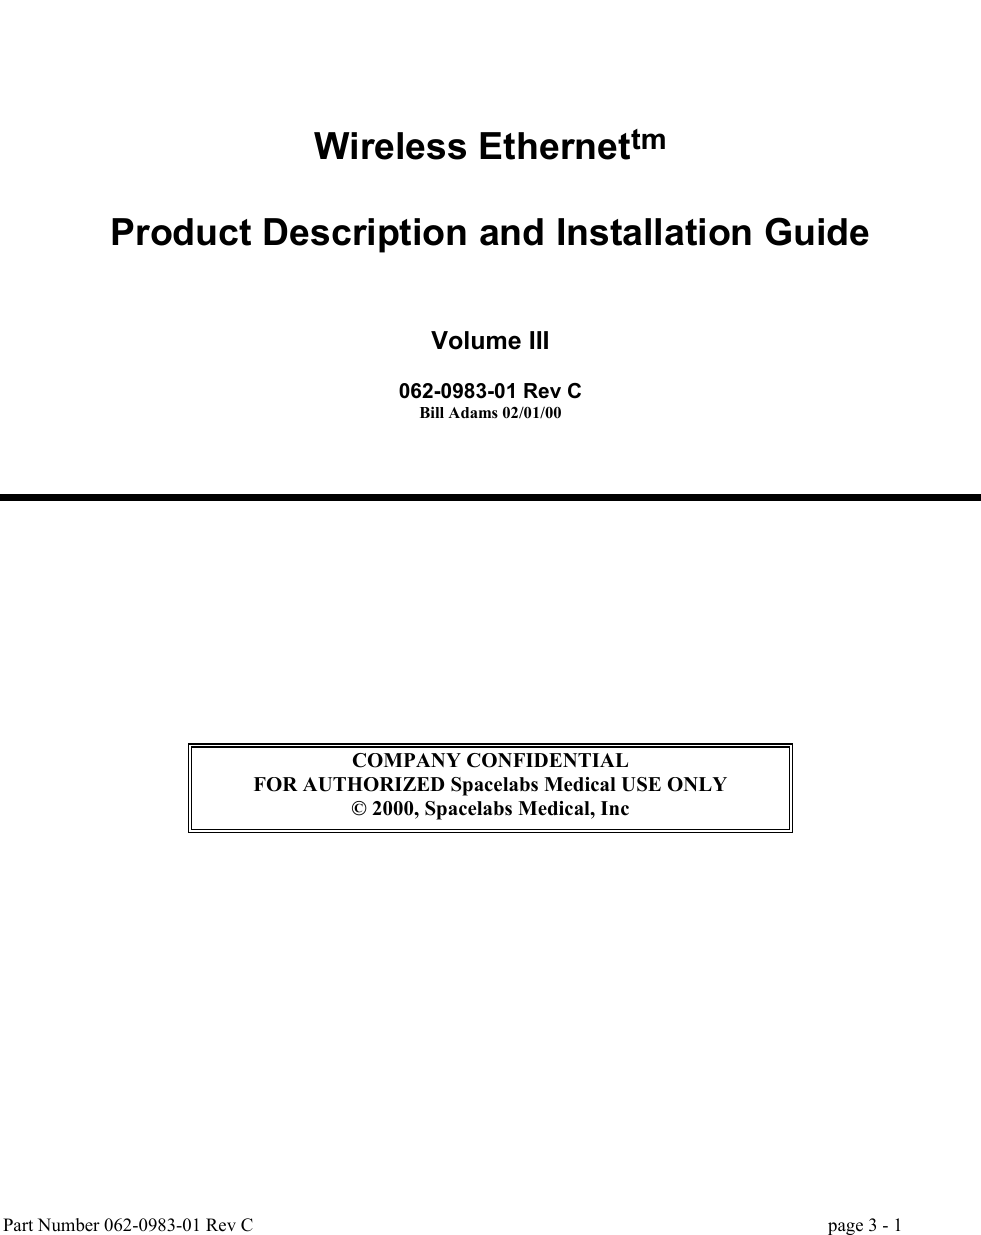 Part Number 062-0983-01 Rev C   page 3 - 1                    Wireless Ethernettm  Product Description and Installation Guide     Volume III   062-0983-01 Rev C Bill Adams 02/01/00              COMPANY CONFIDENTIAL FOR AUTHORIZED Spacelabs Medical USE ONLY © 2000, Spacelabs Medical, Inc 